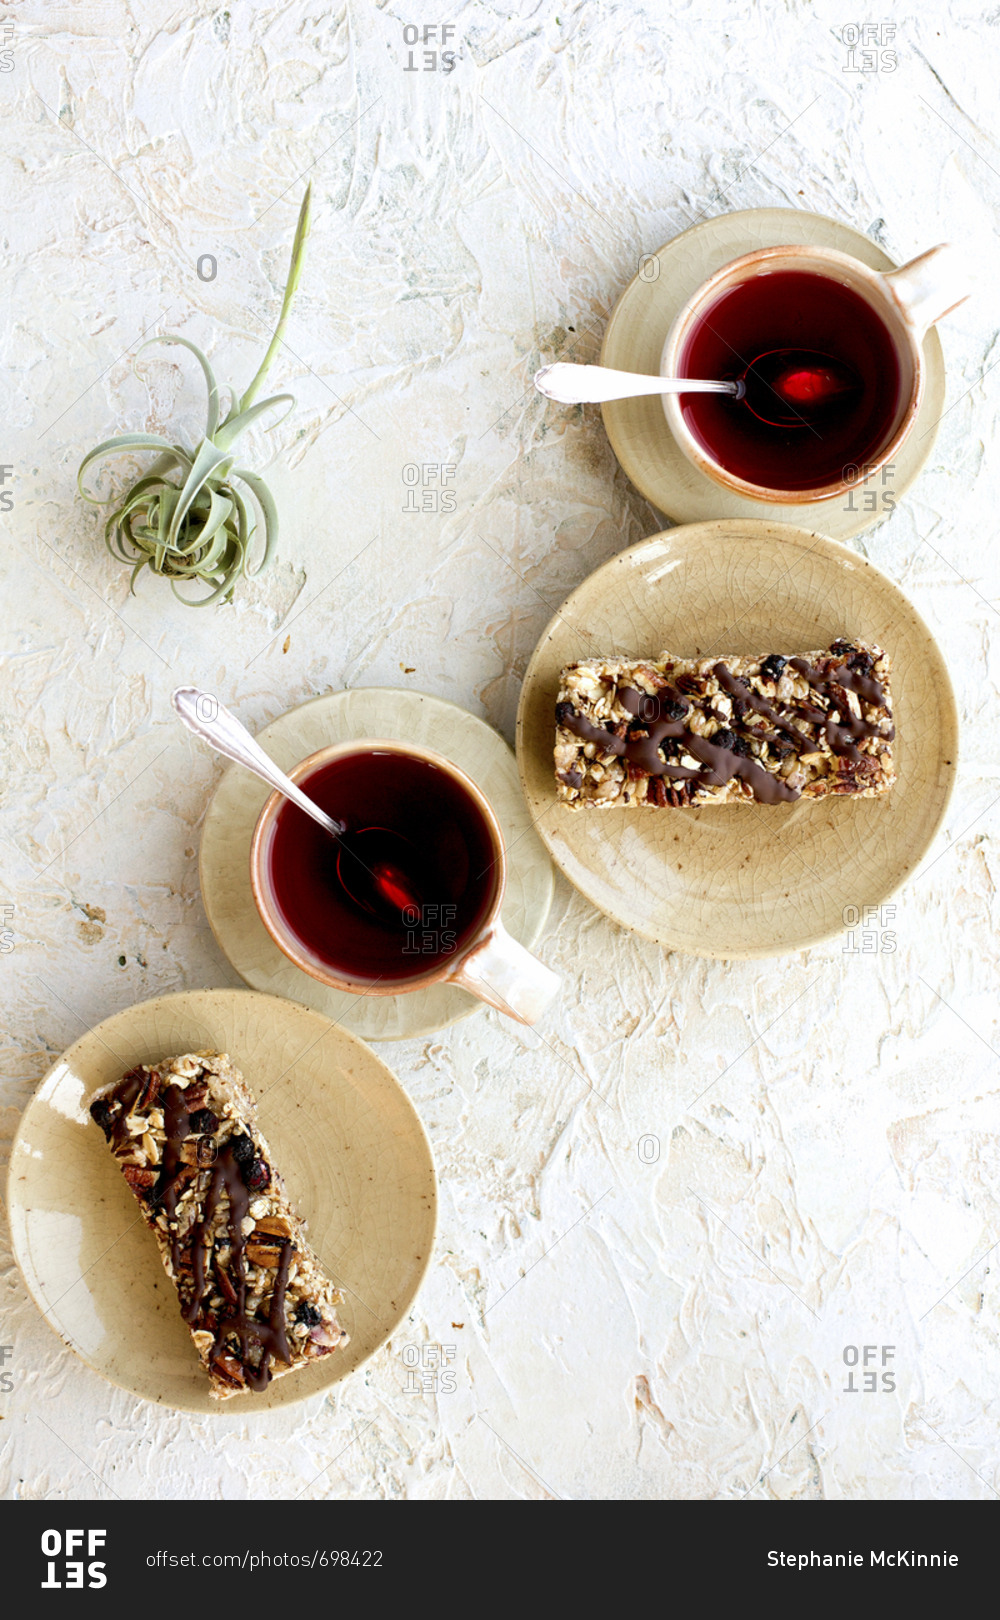 Blueberry caramelized pecan breakfast bars drizzled with dark chocolate served with hot tea